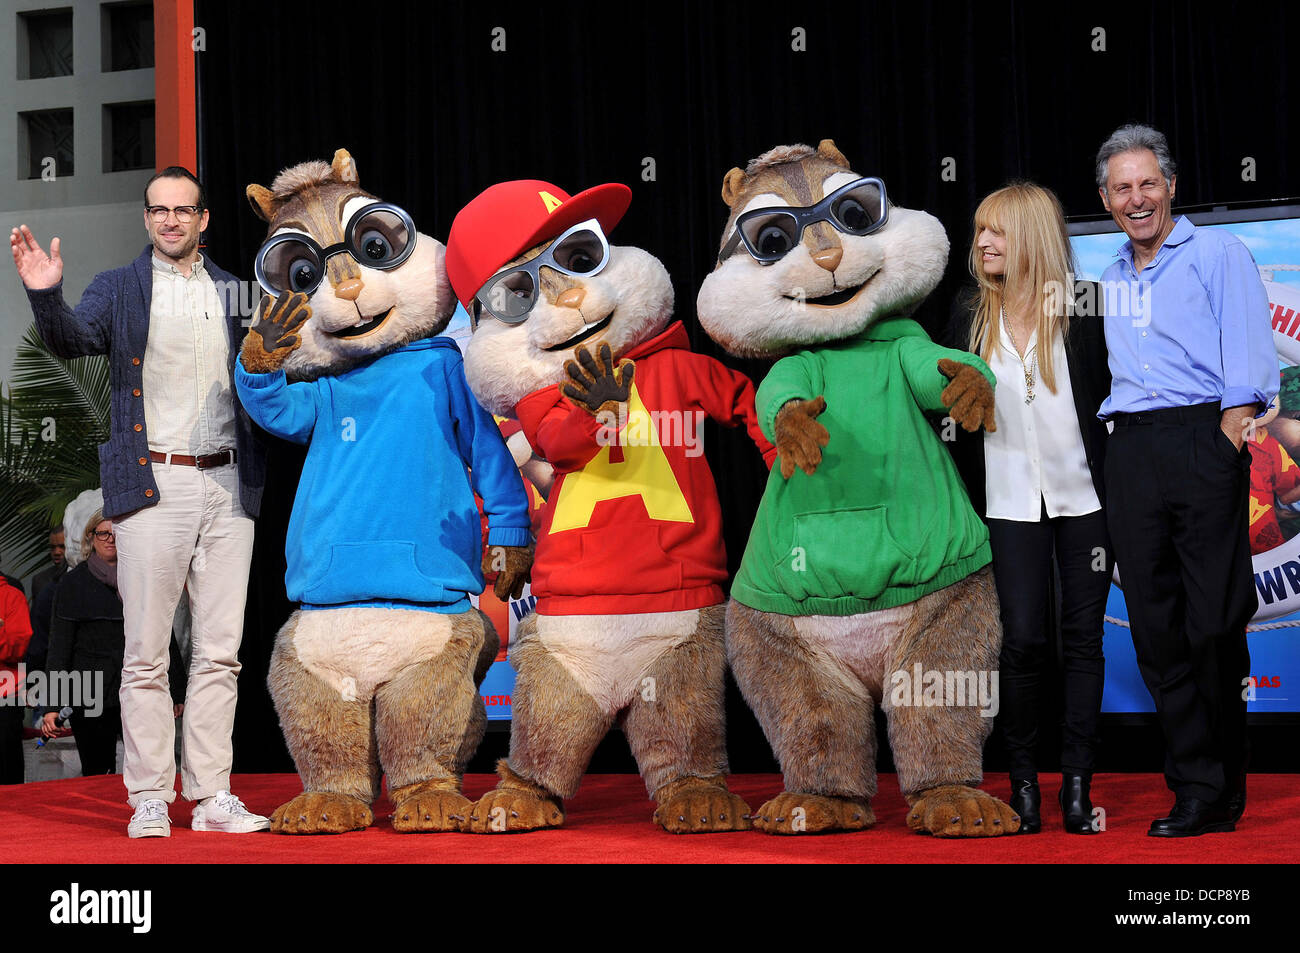 Jason Lee, Alvin and the Chipmunks, Janice Bagdasarian and Ross Bagdasarian Alvin and the Chipmunks hand and footprint ceremony at Grauman's Chinese Theater  Hollywood, California - 01.11.11 Stock Photo